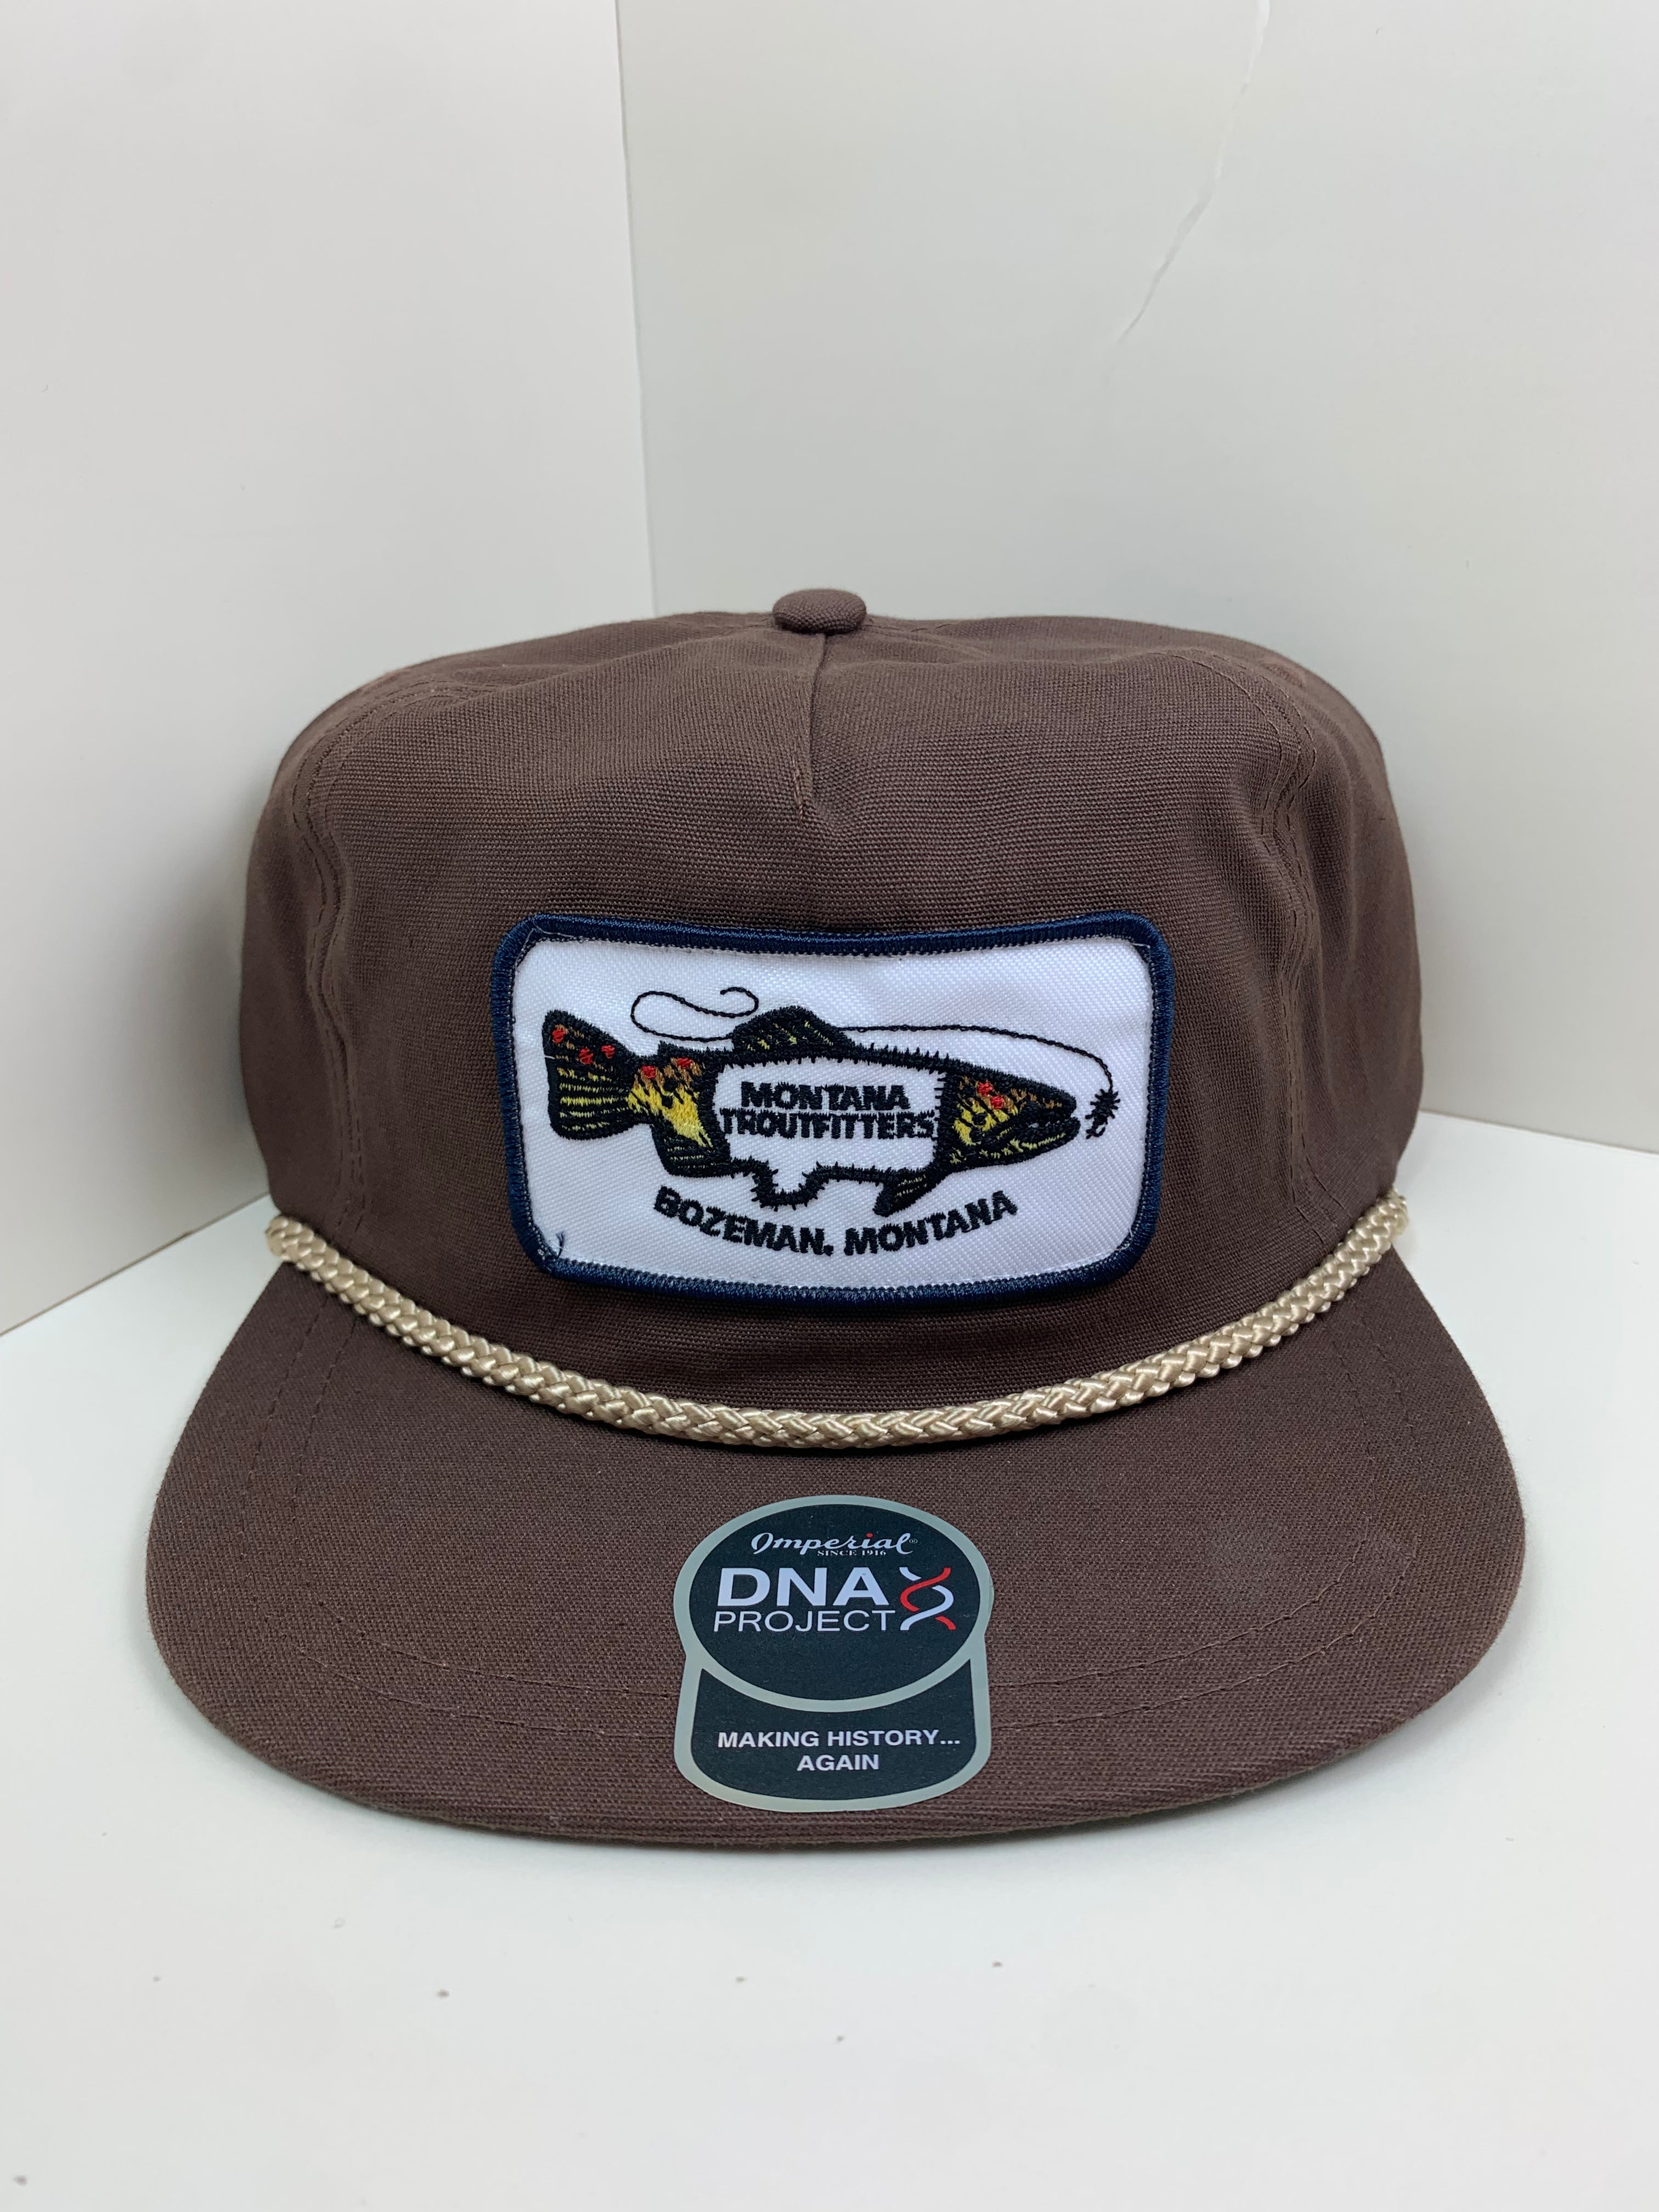 CROSS CURRENTS FLY SHOP MONTANA* Fly fishing Ball cap hat *IMPERIAL  HEADWEAR*